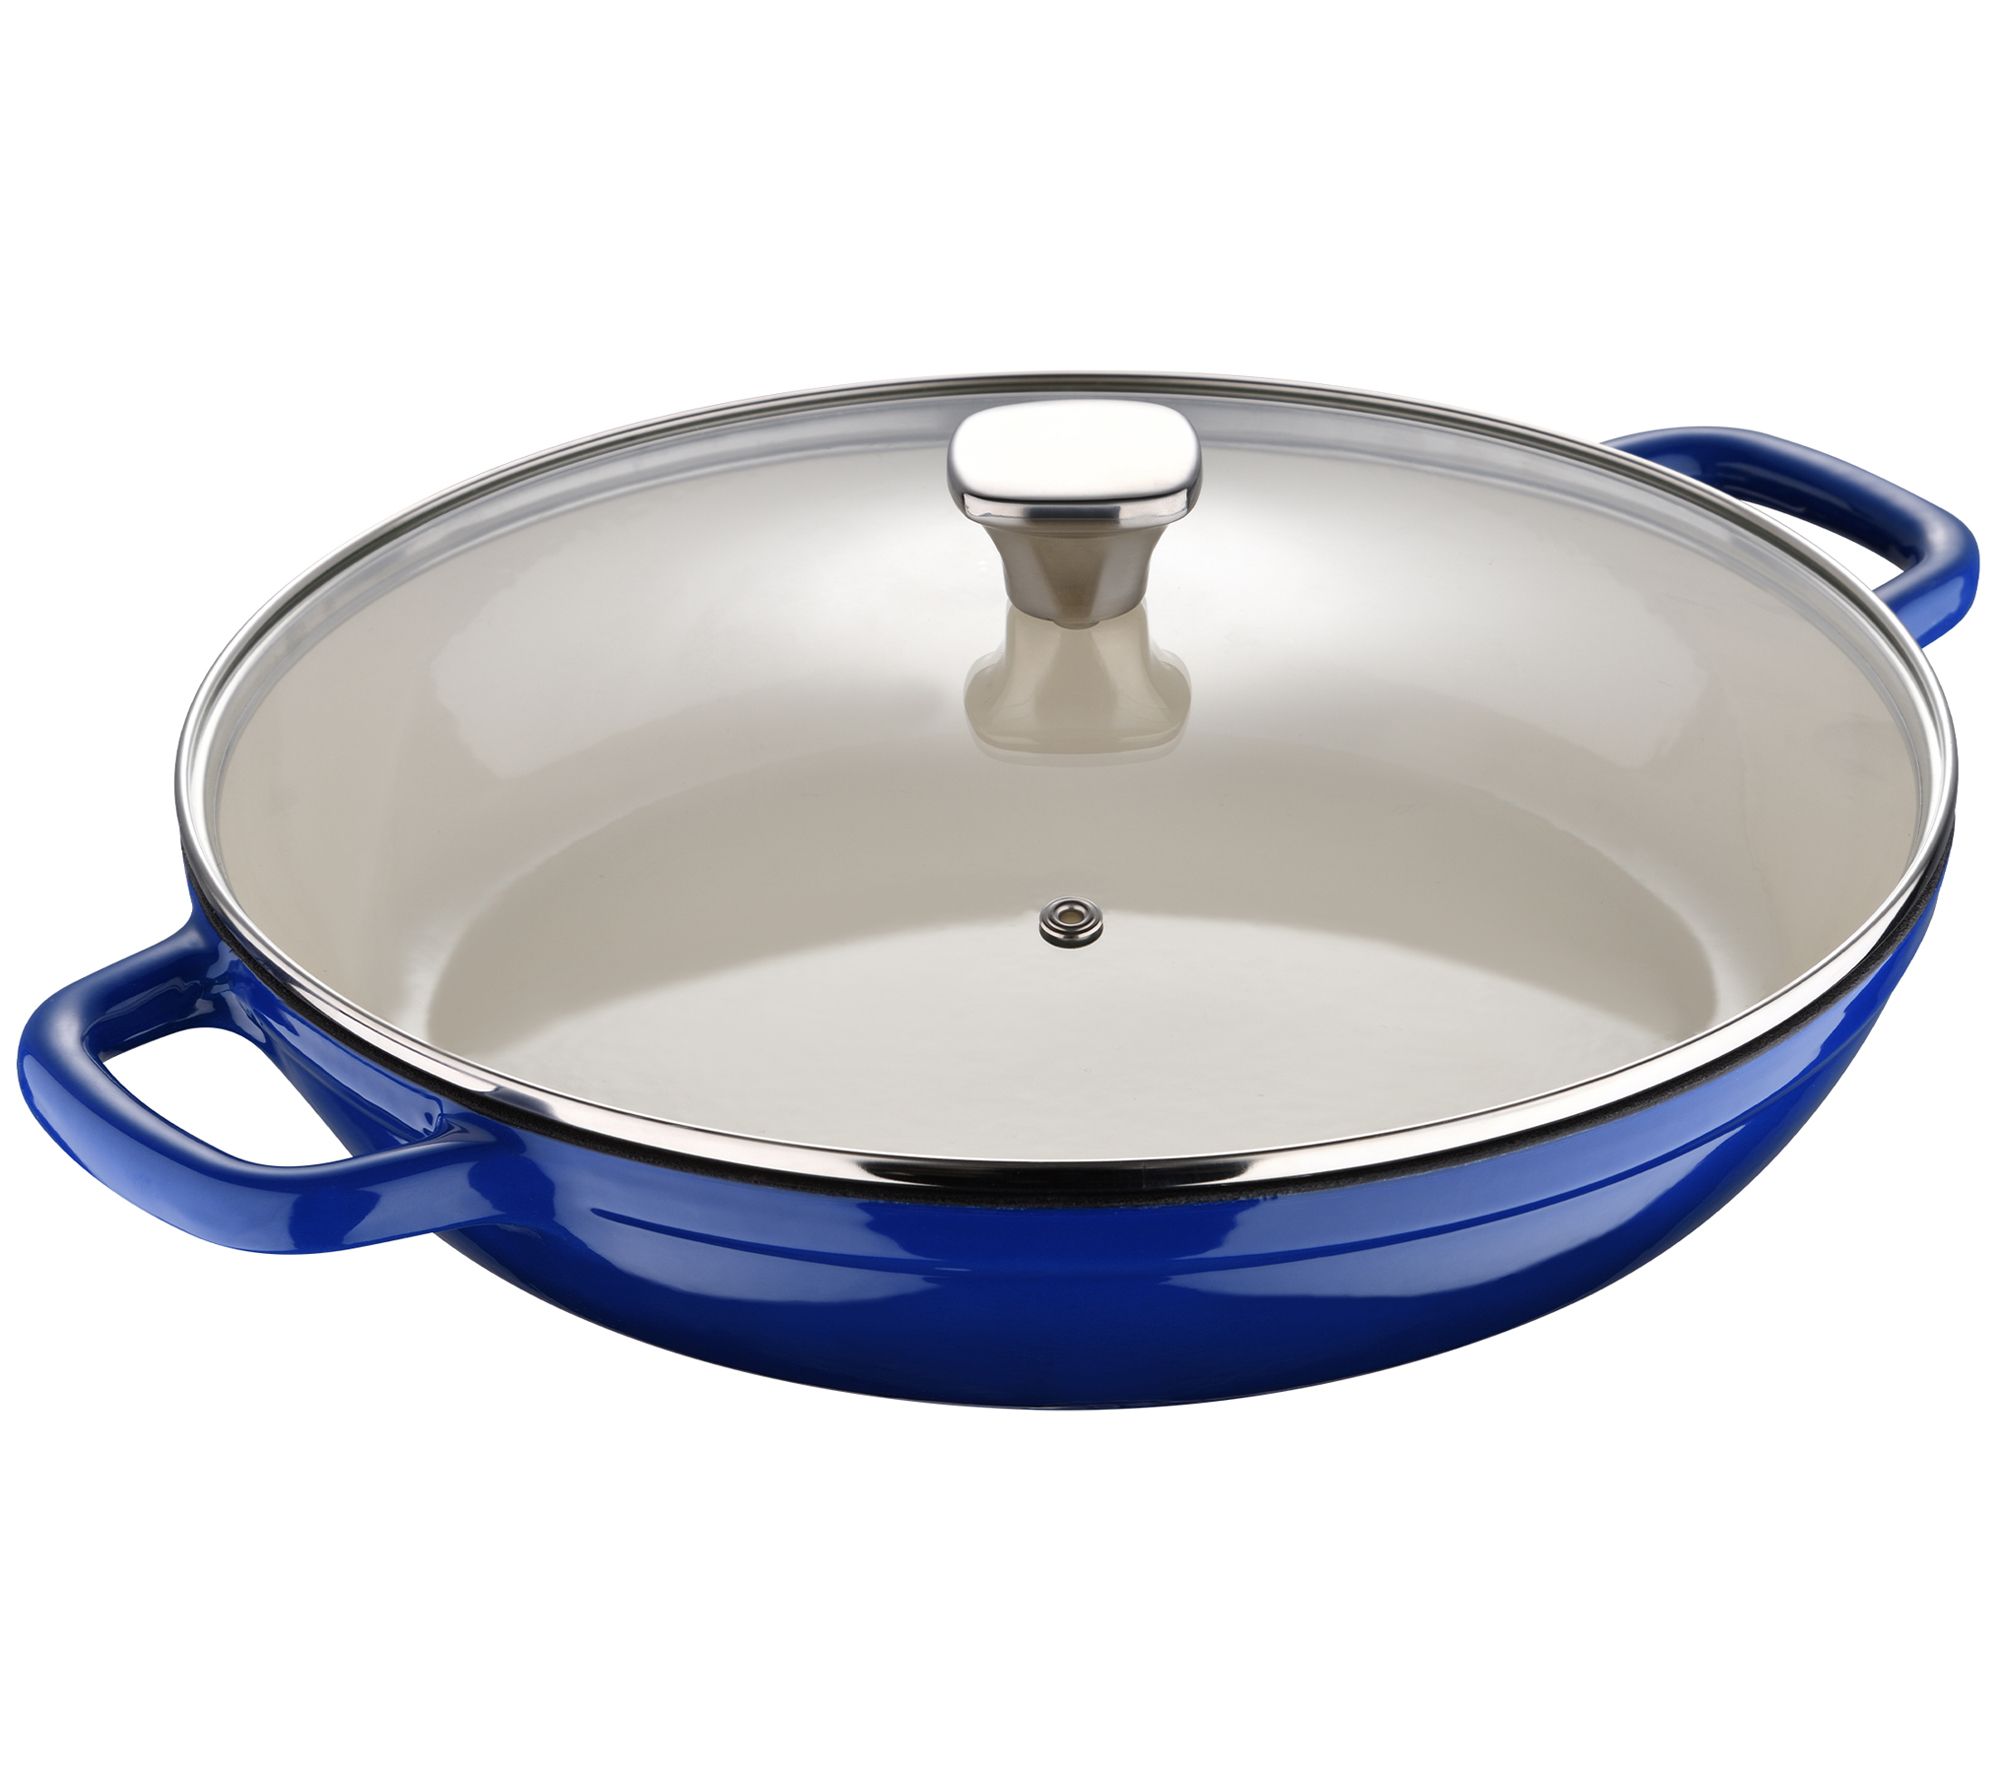 QVC Knocks the Price of This Le Creuset Dutch Oven Down to $270 - CNET